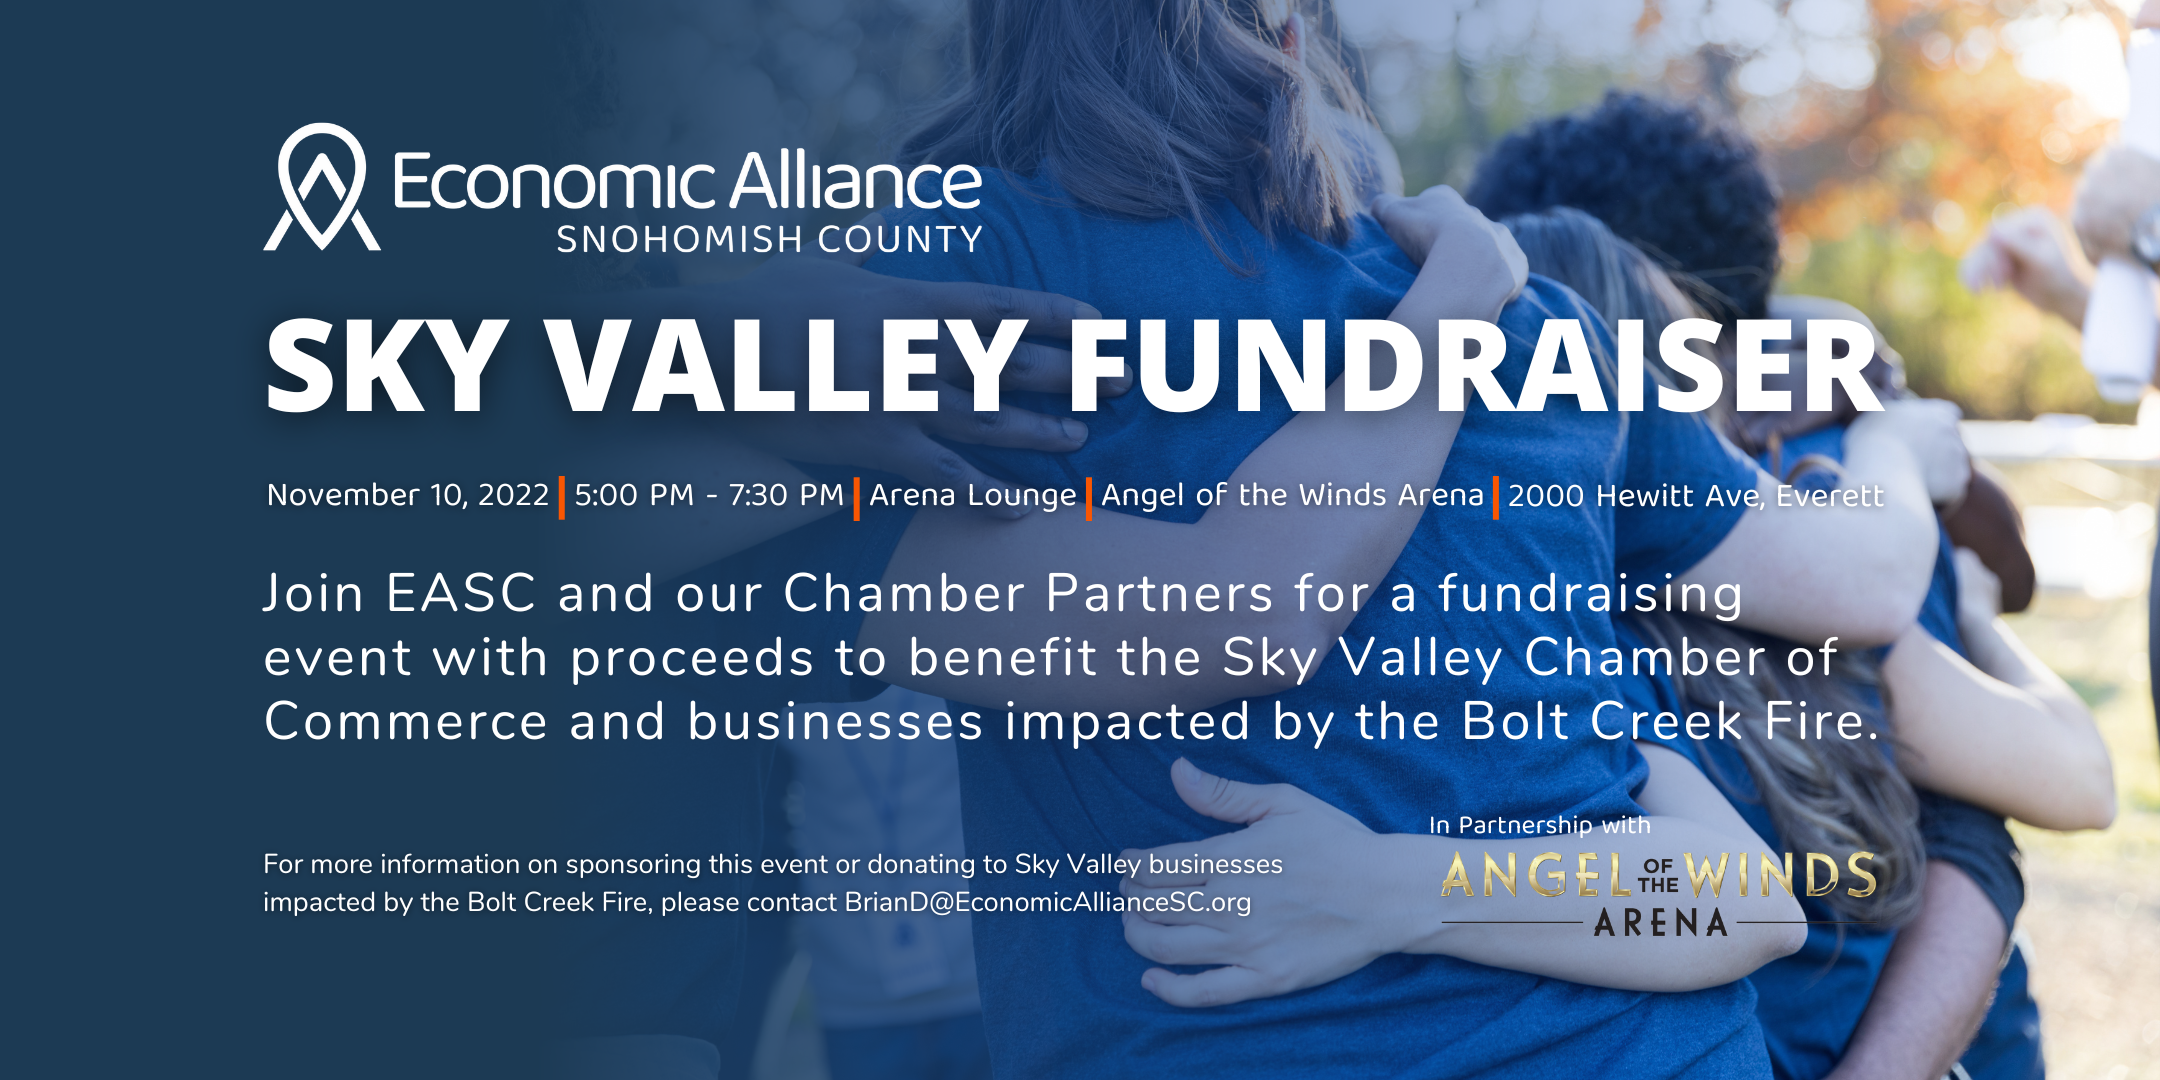 Economic Alliance Snohomish County to Host Sky Valley Fundraiser on November 10 Photo